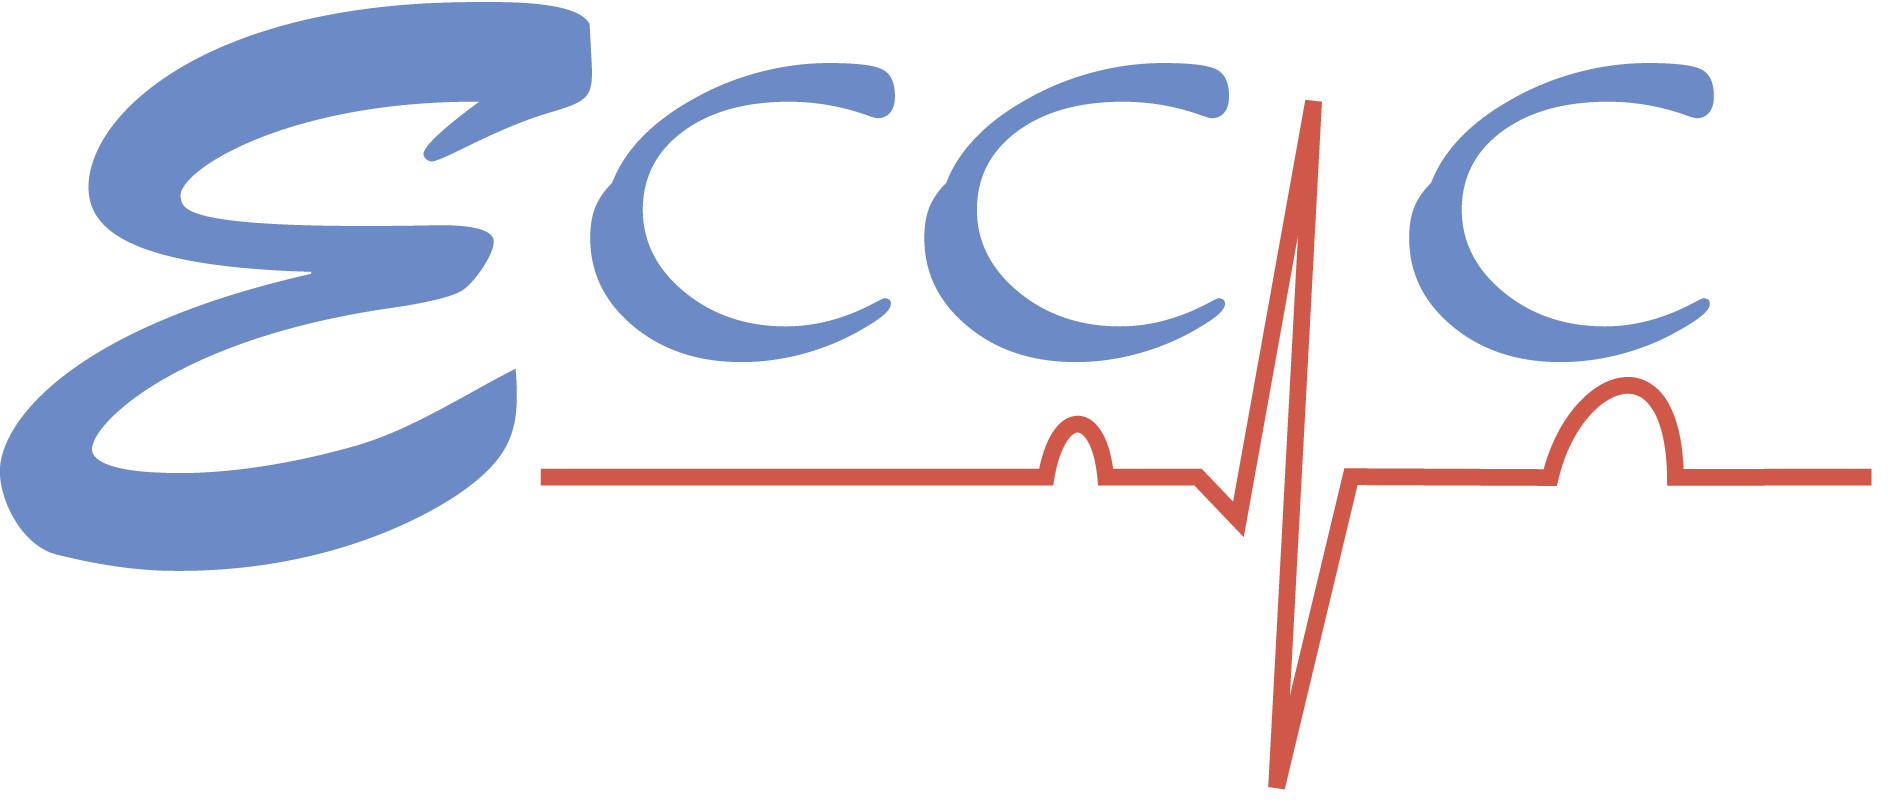 Emirates Critical Care Conference 2020 on Apr 2nd – 4th at InterContinental Dubai Festival City